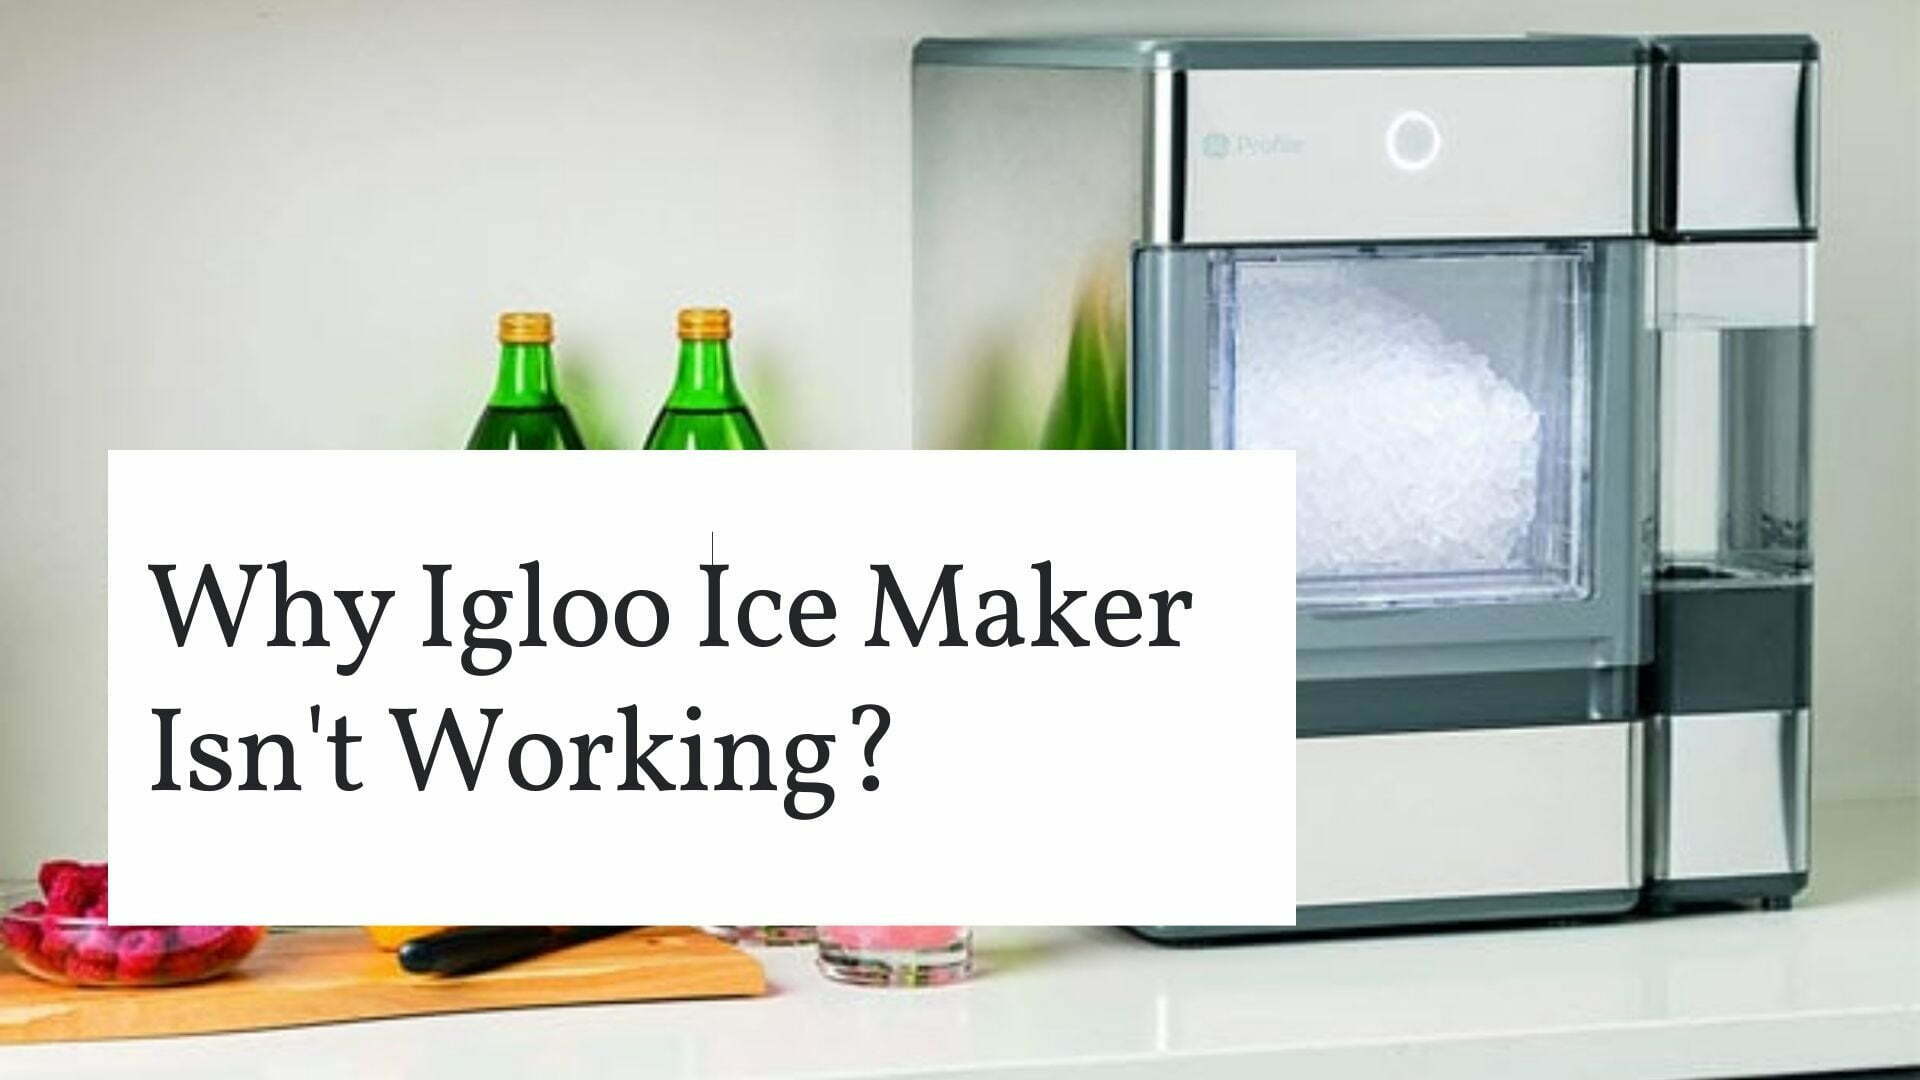 Why Igloo Ice Maker Isn’t Working? Common Issues and Solution